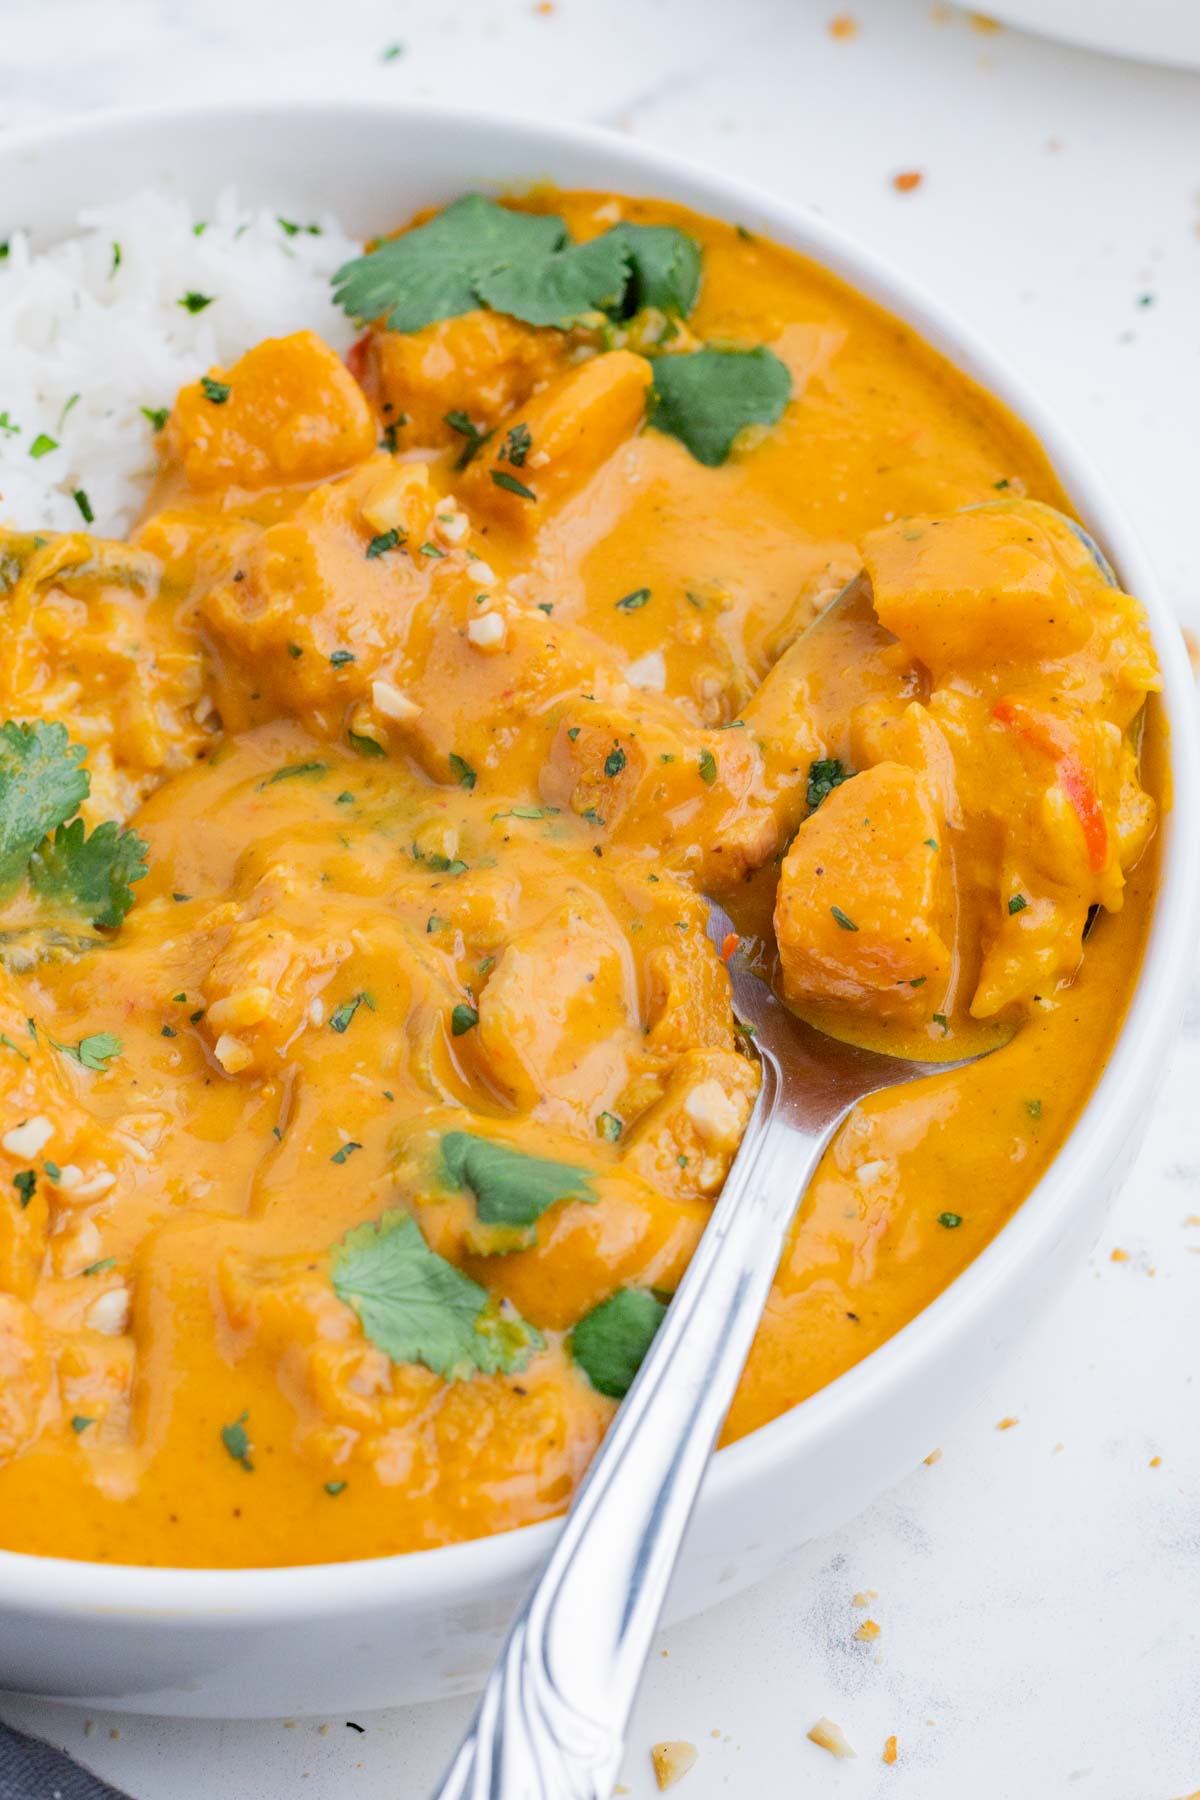 A spoon digs into a bowl full of pumpkin curry and white rice.